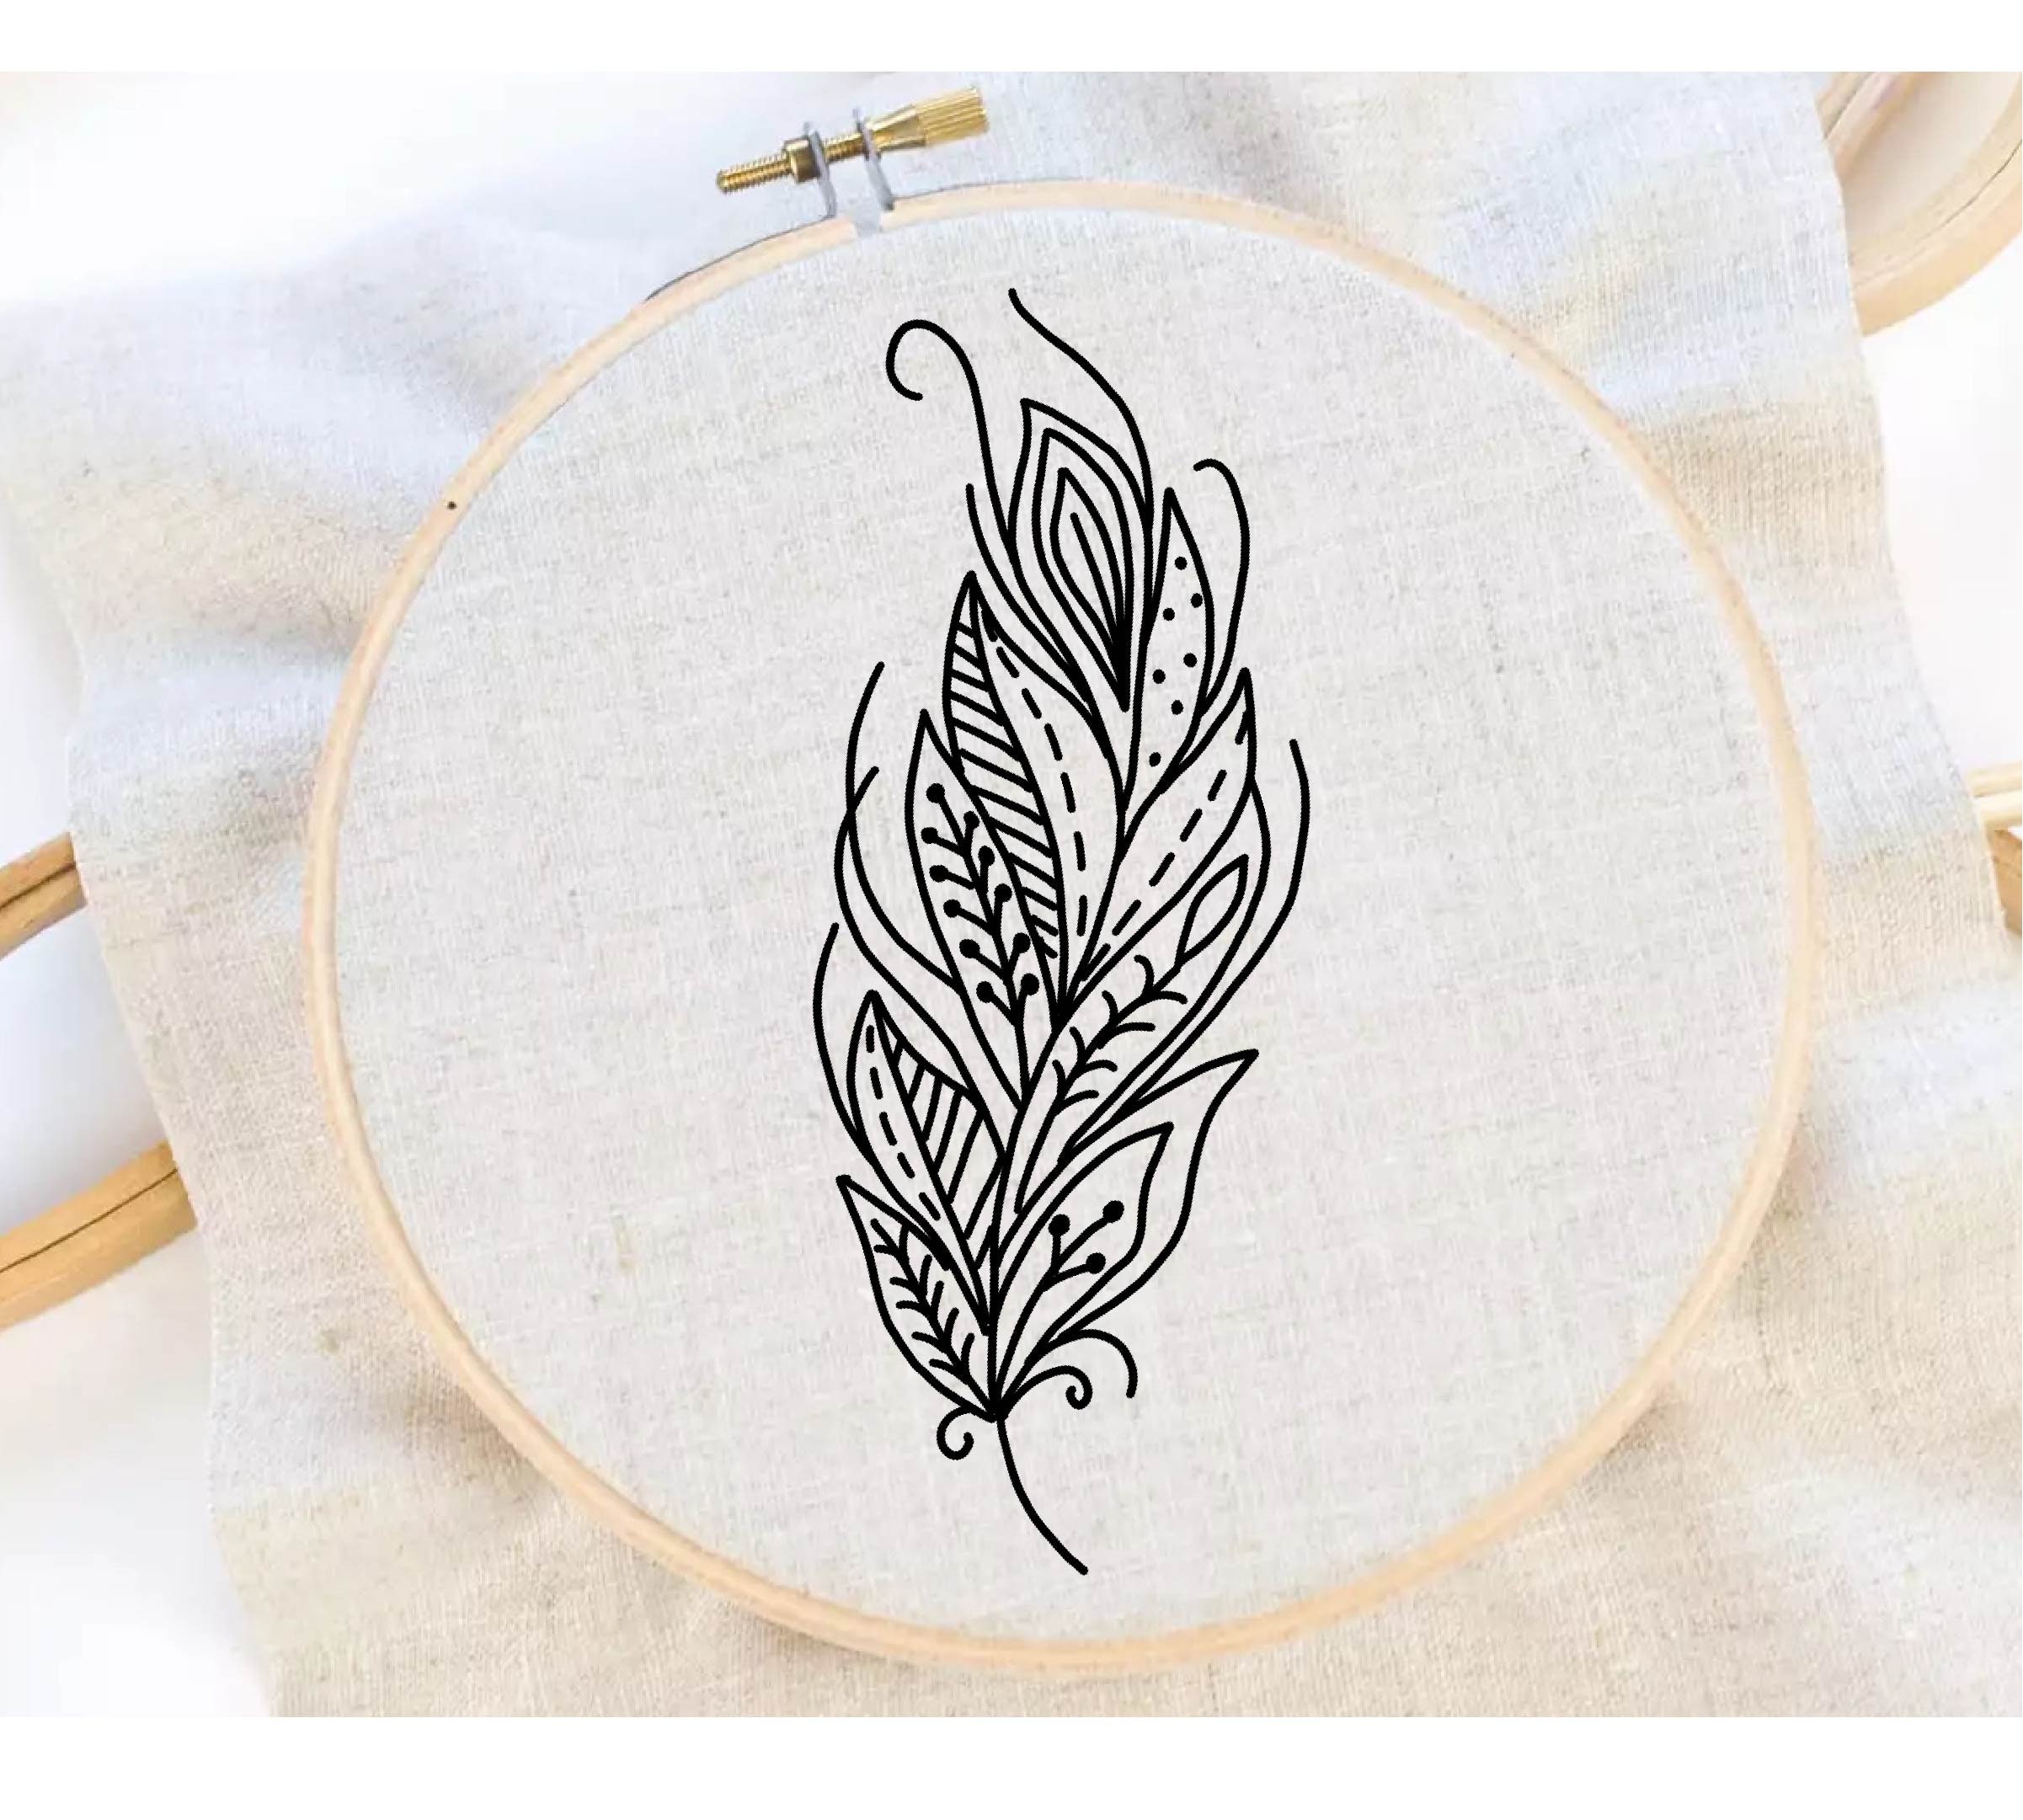 Feathers Embroidery Pattern Feather Art Embroidery Sampler Hand